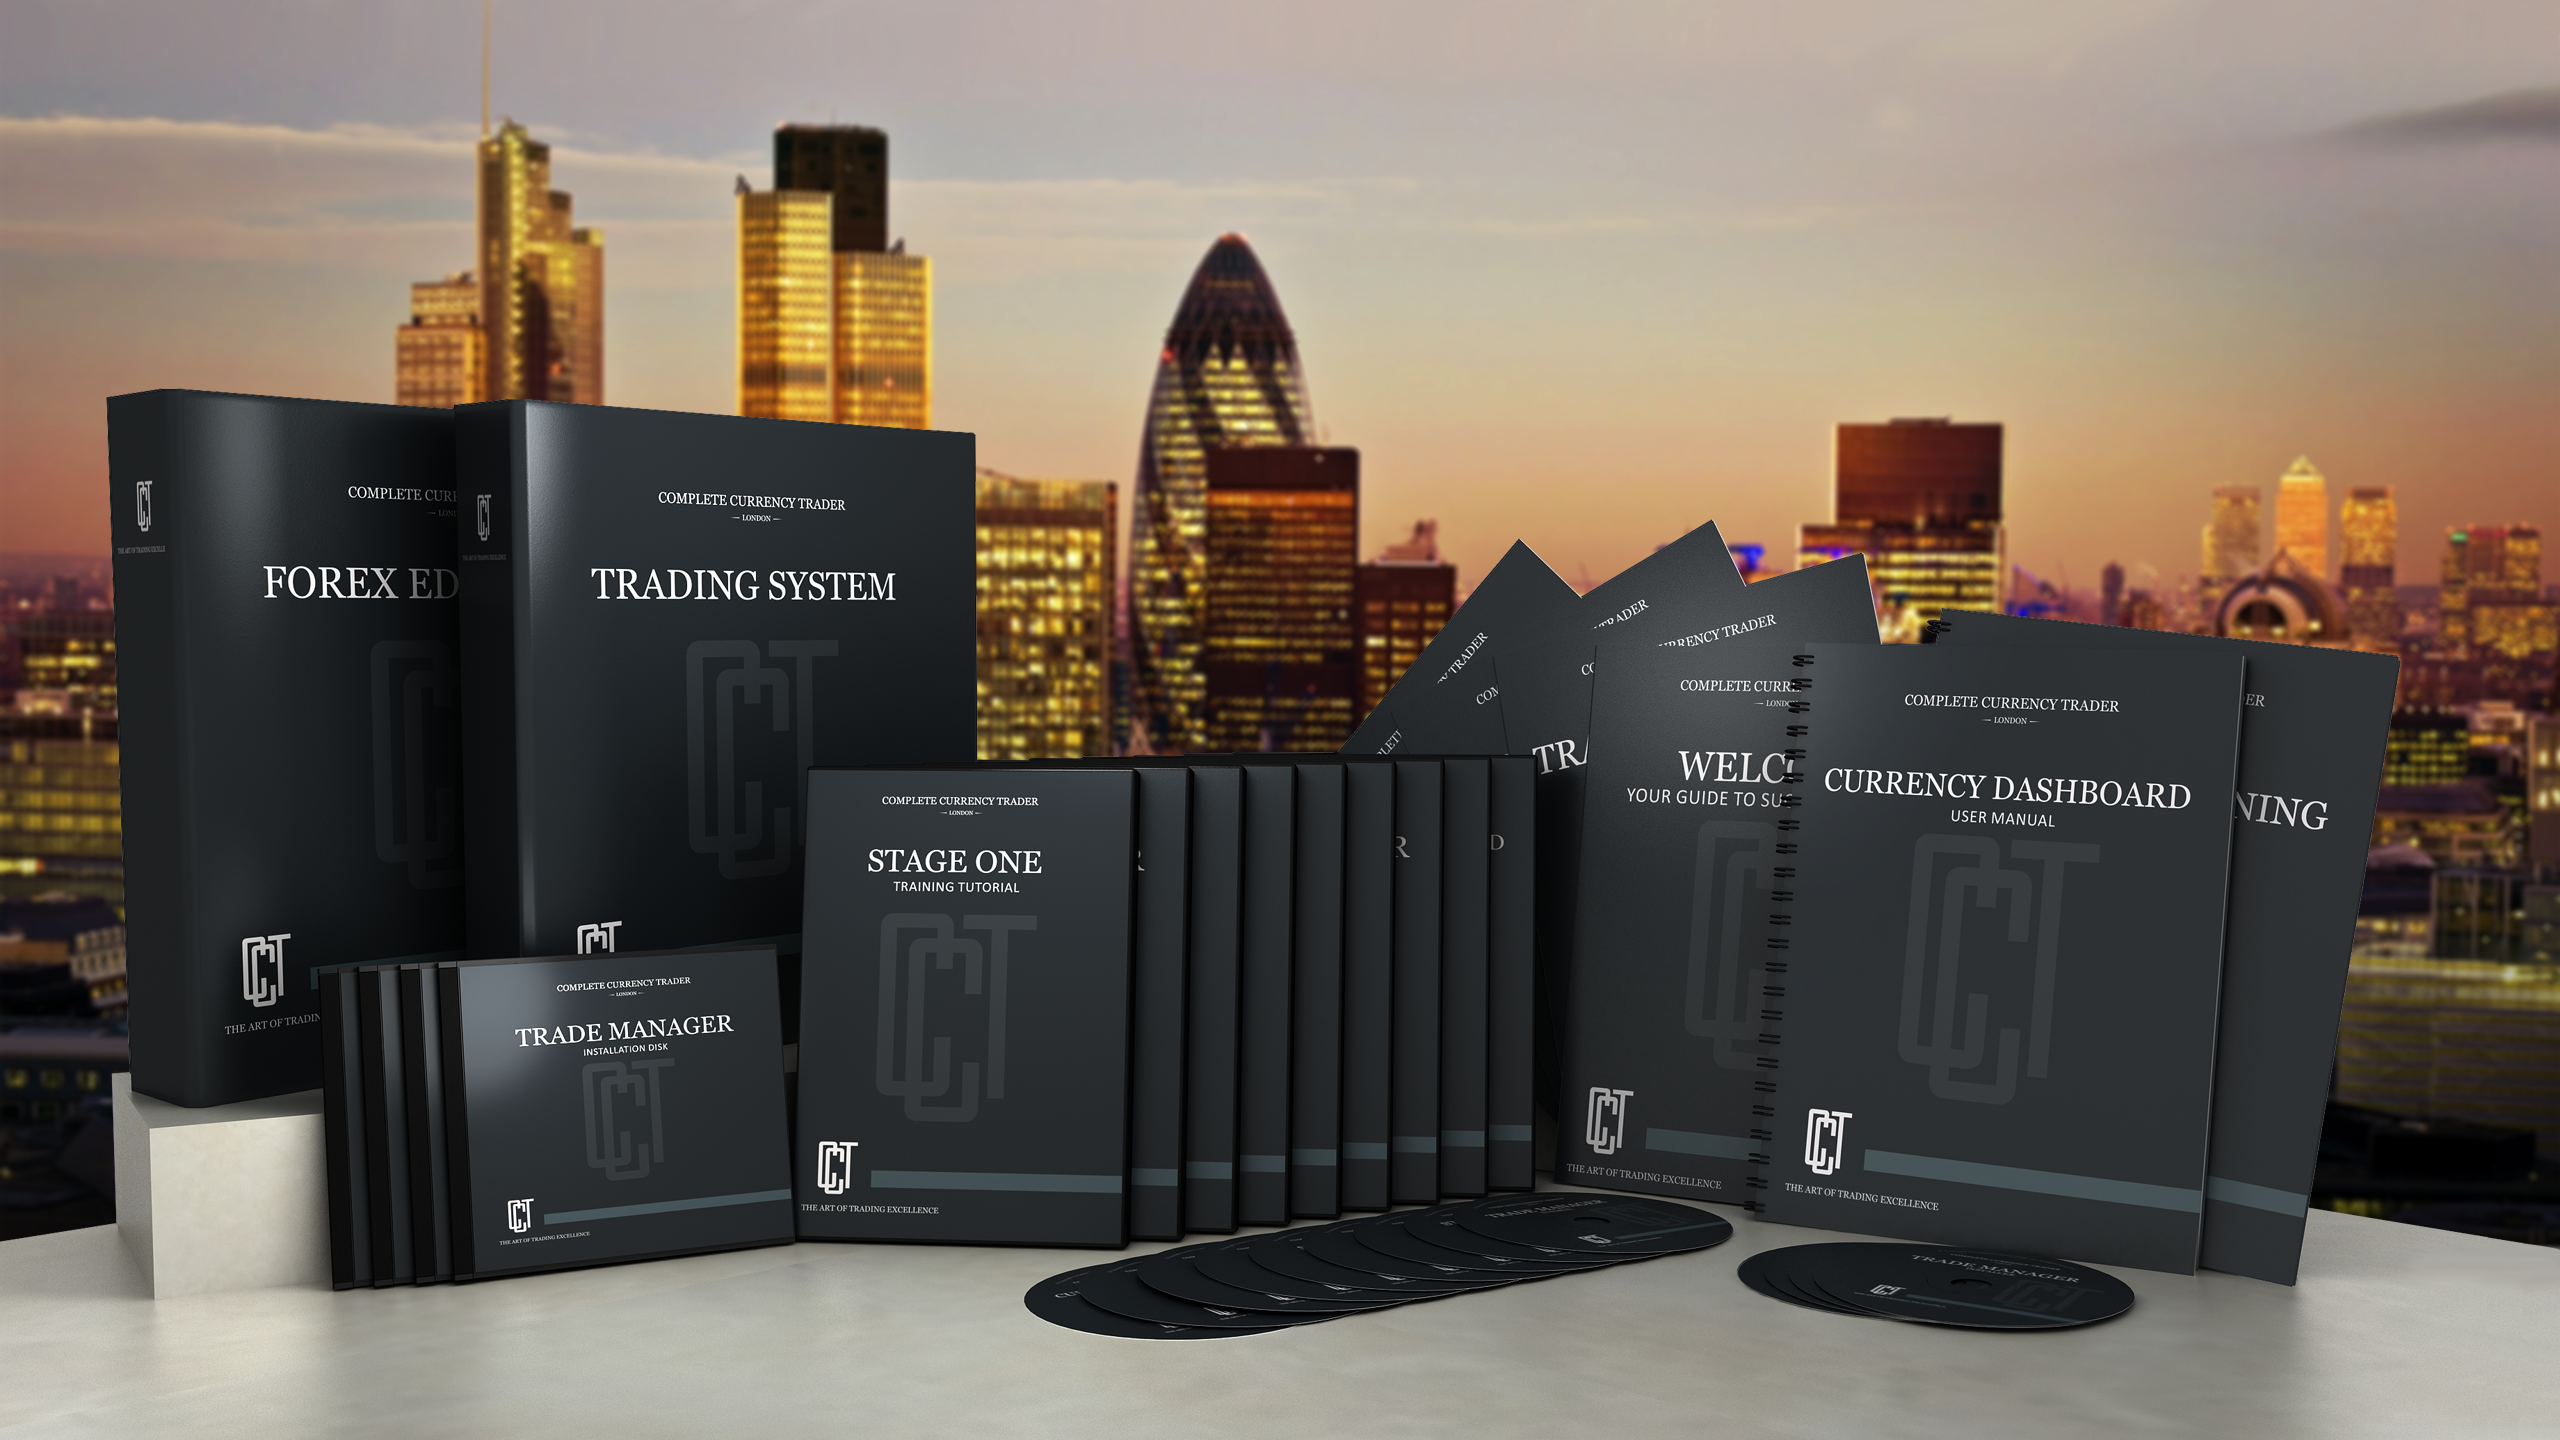 Complete forex trading course